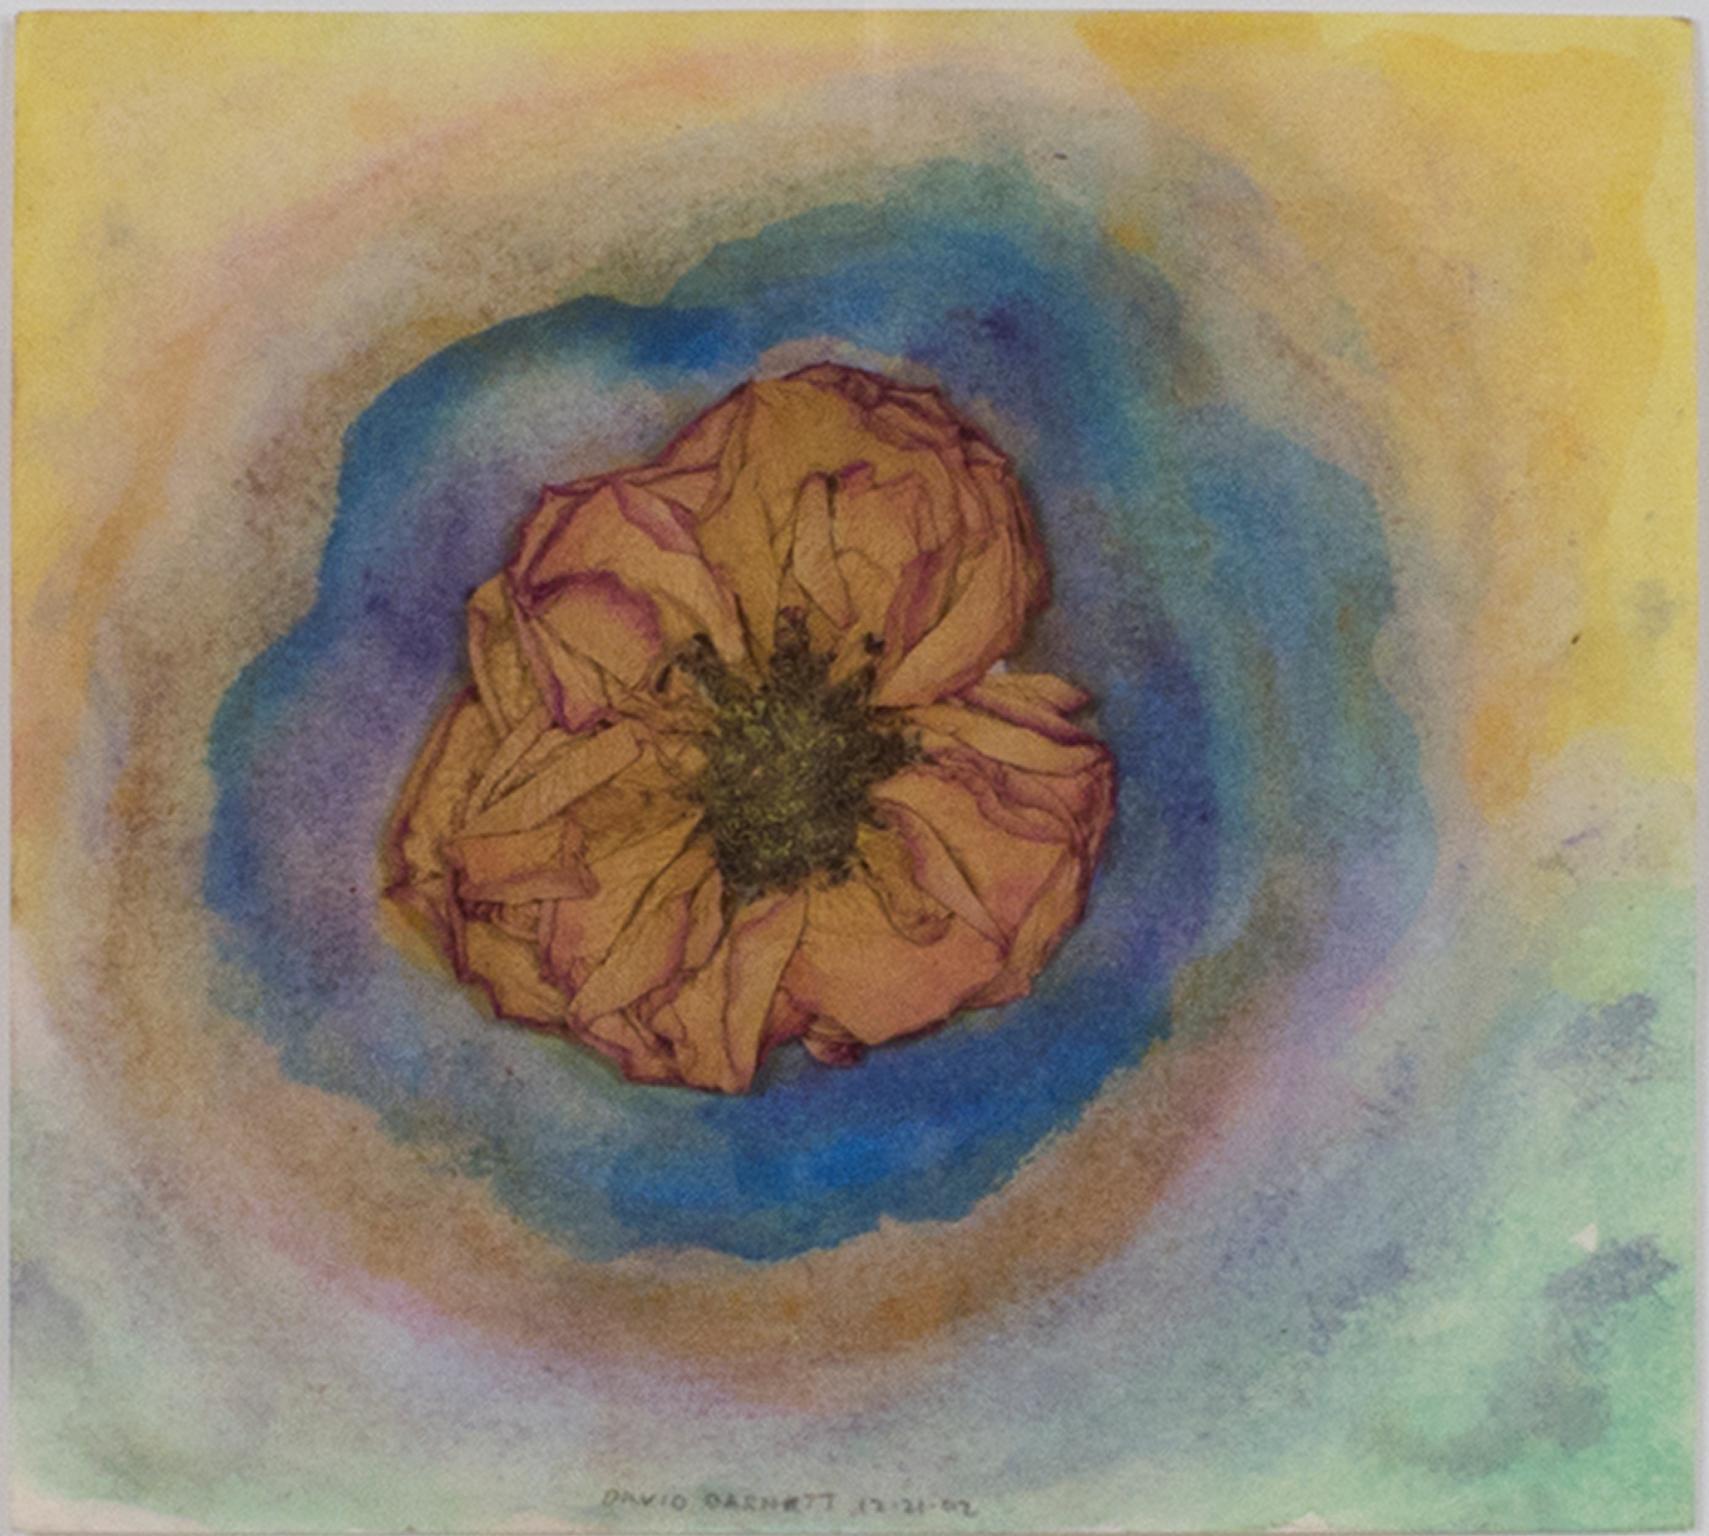 "Sky Flower Reflection" is an original watercolor and piece by David Barnett, signed along the bottom edge. The piece incorporates a dried rose in the center with circles of watercolor surrounding it, as though it were floating on the surface of a